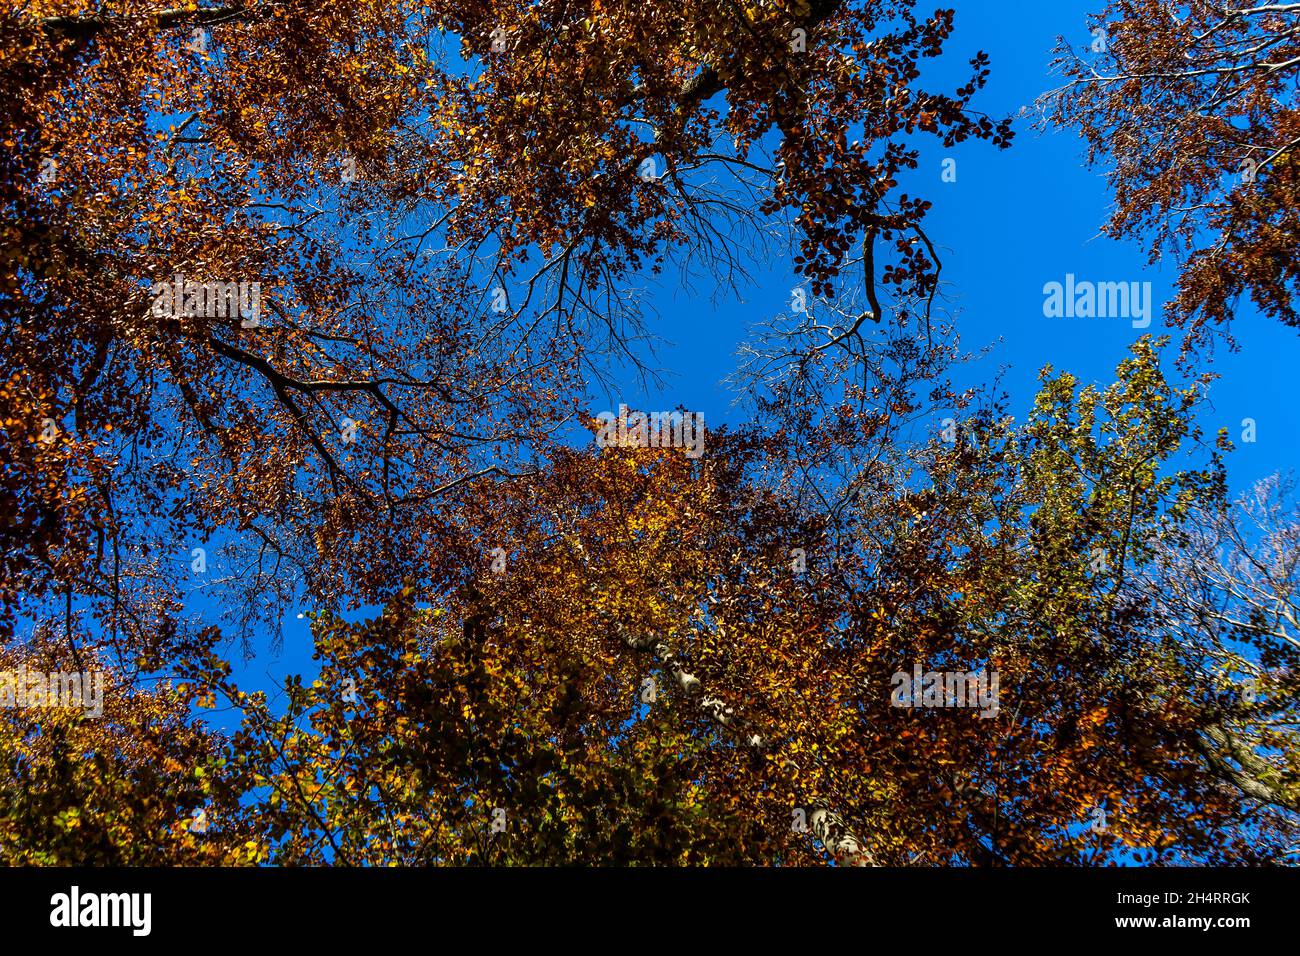 beautifully exposed beech crowns against a bright blue sky in autumn Stock Photo